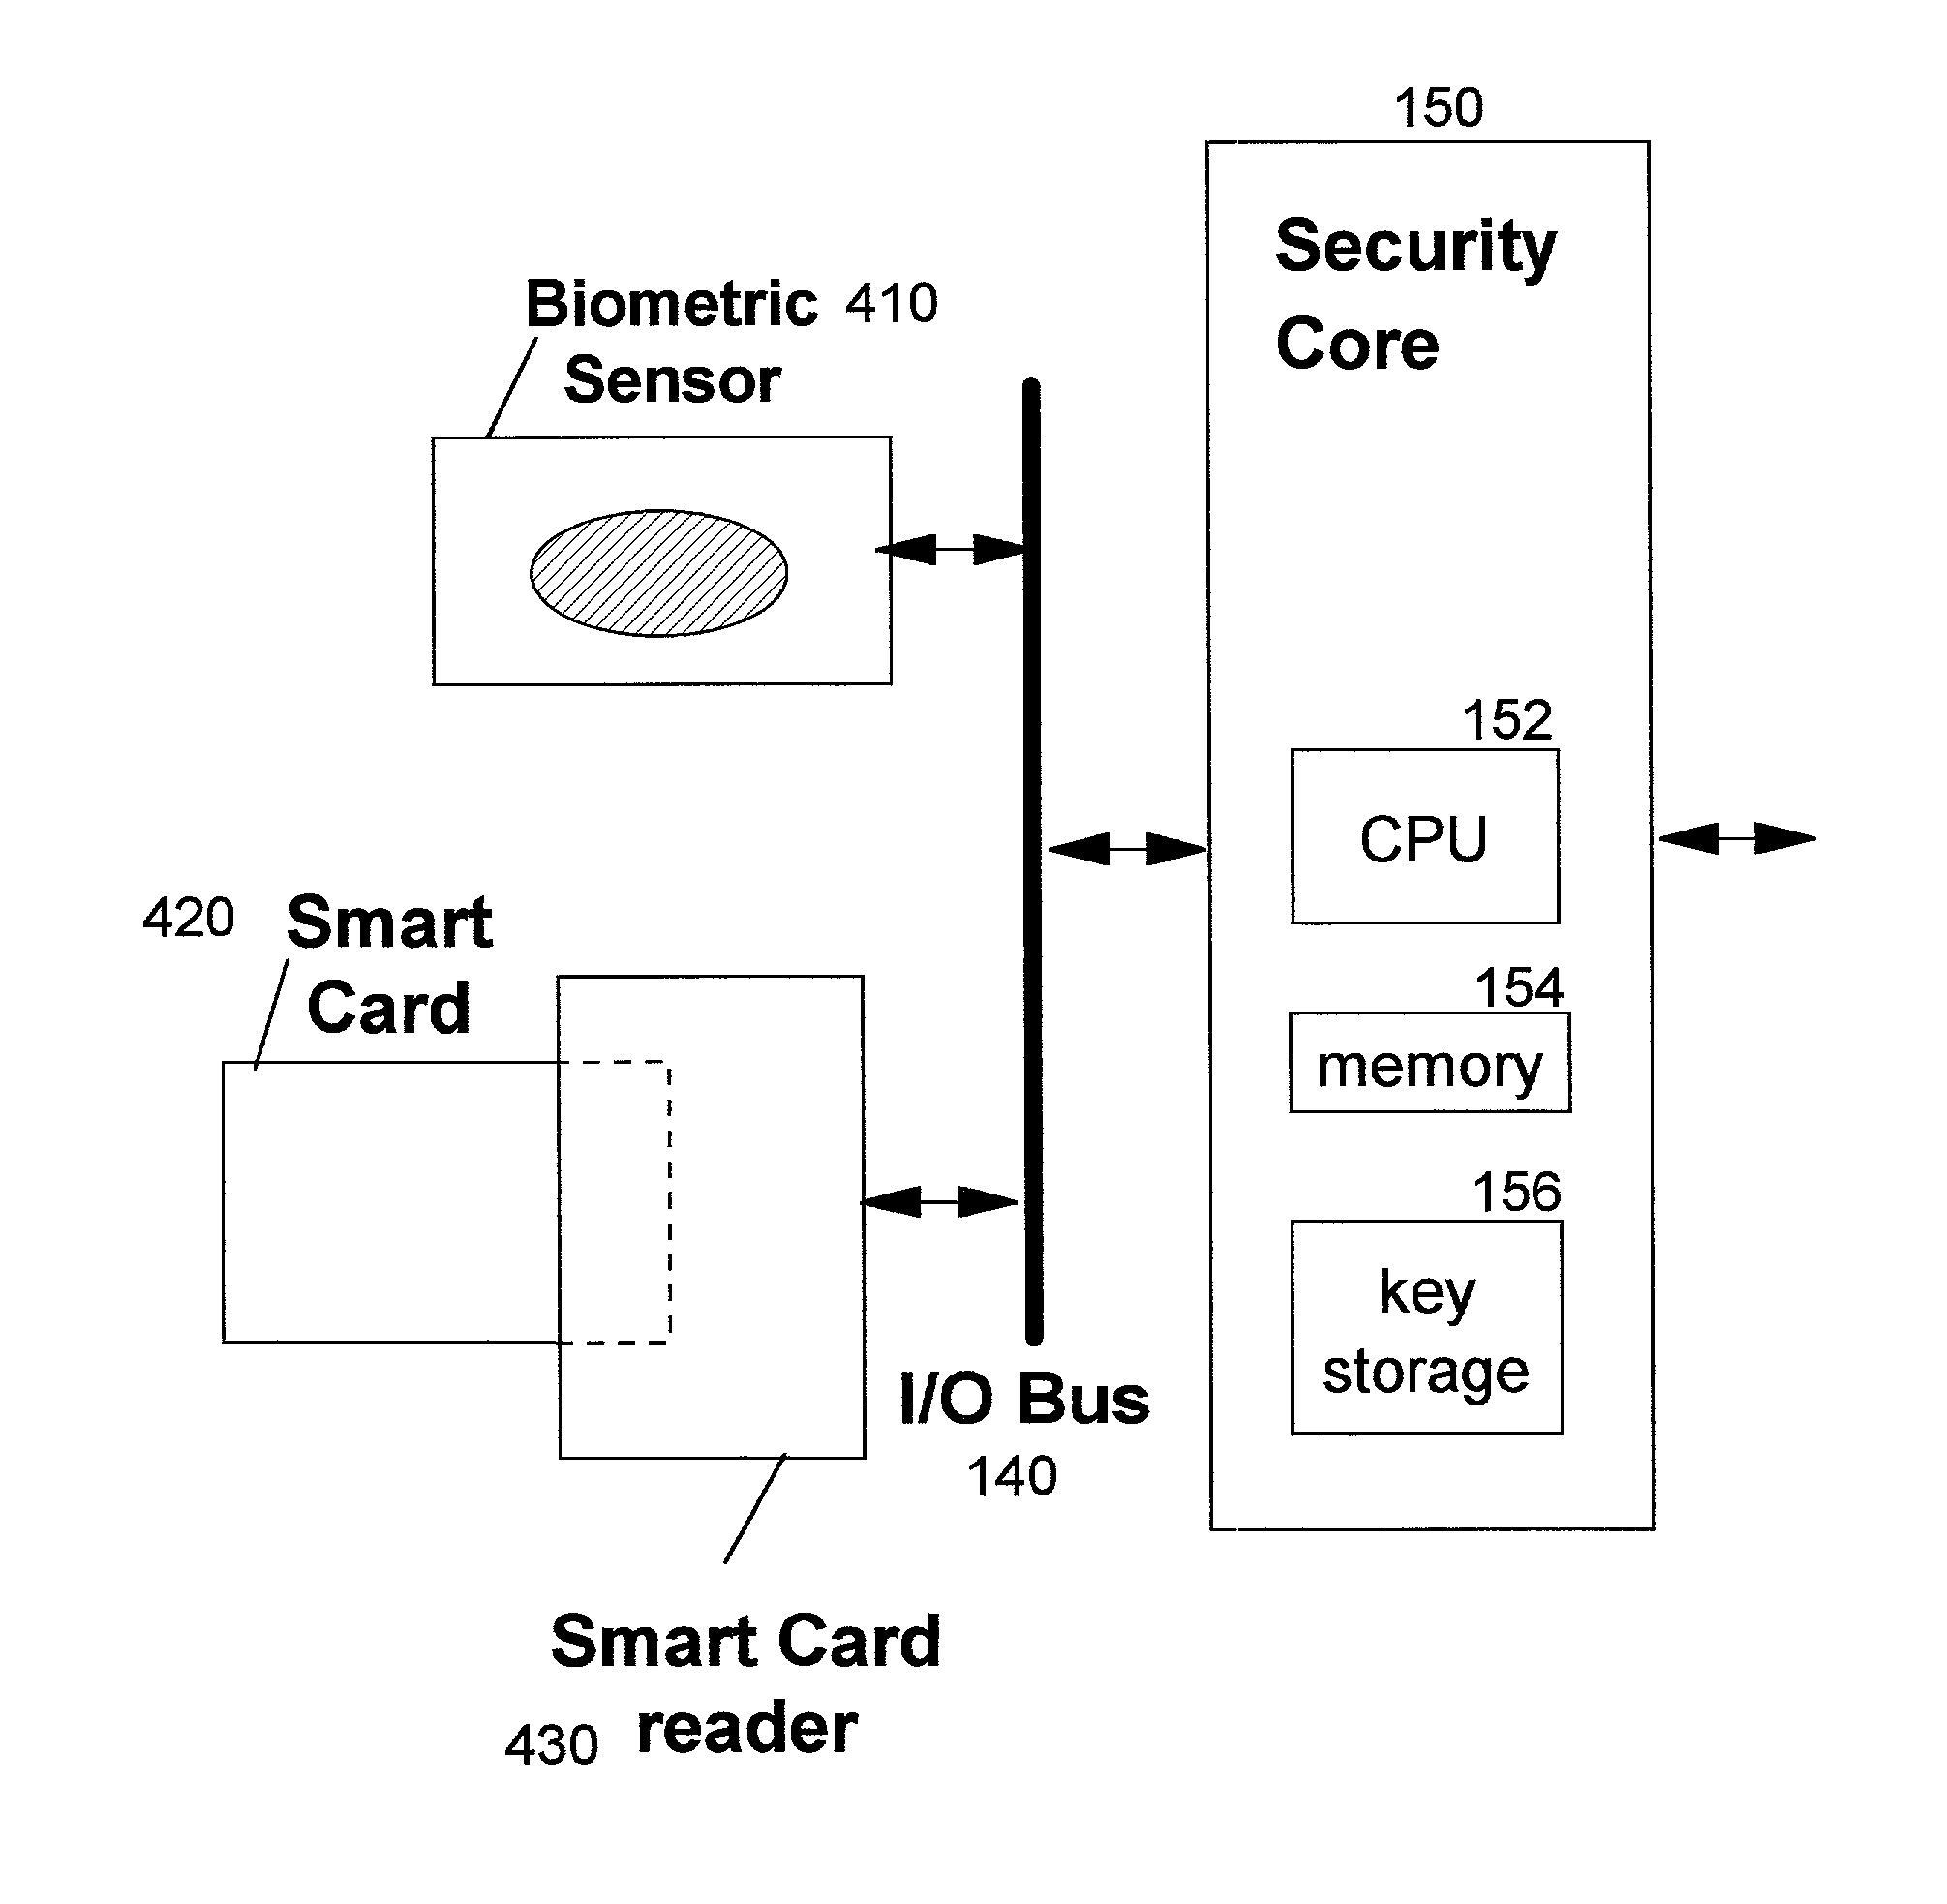 Secure integrated device with secure, dynamically-selectable capabilities